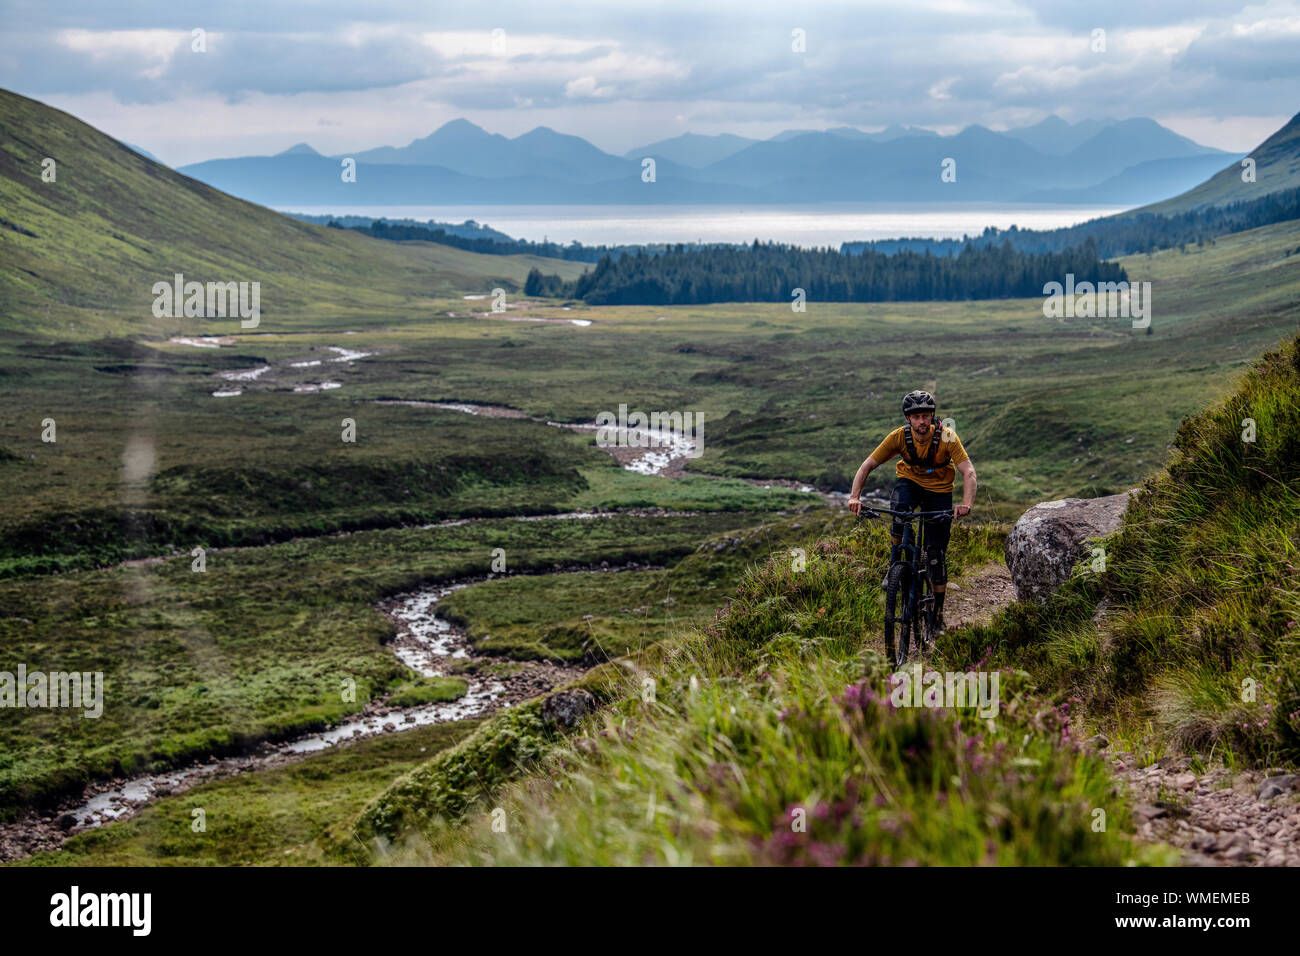 A man rides a mountain bike on a trail on the Applecross Peninsula in the north west Highlands of Scotland in the summer. Stock Photo